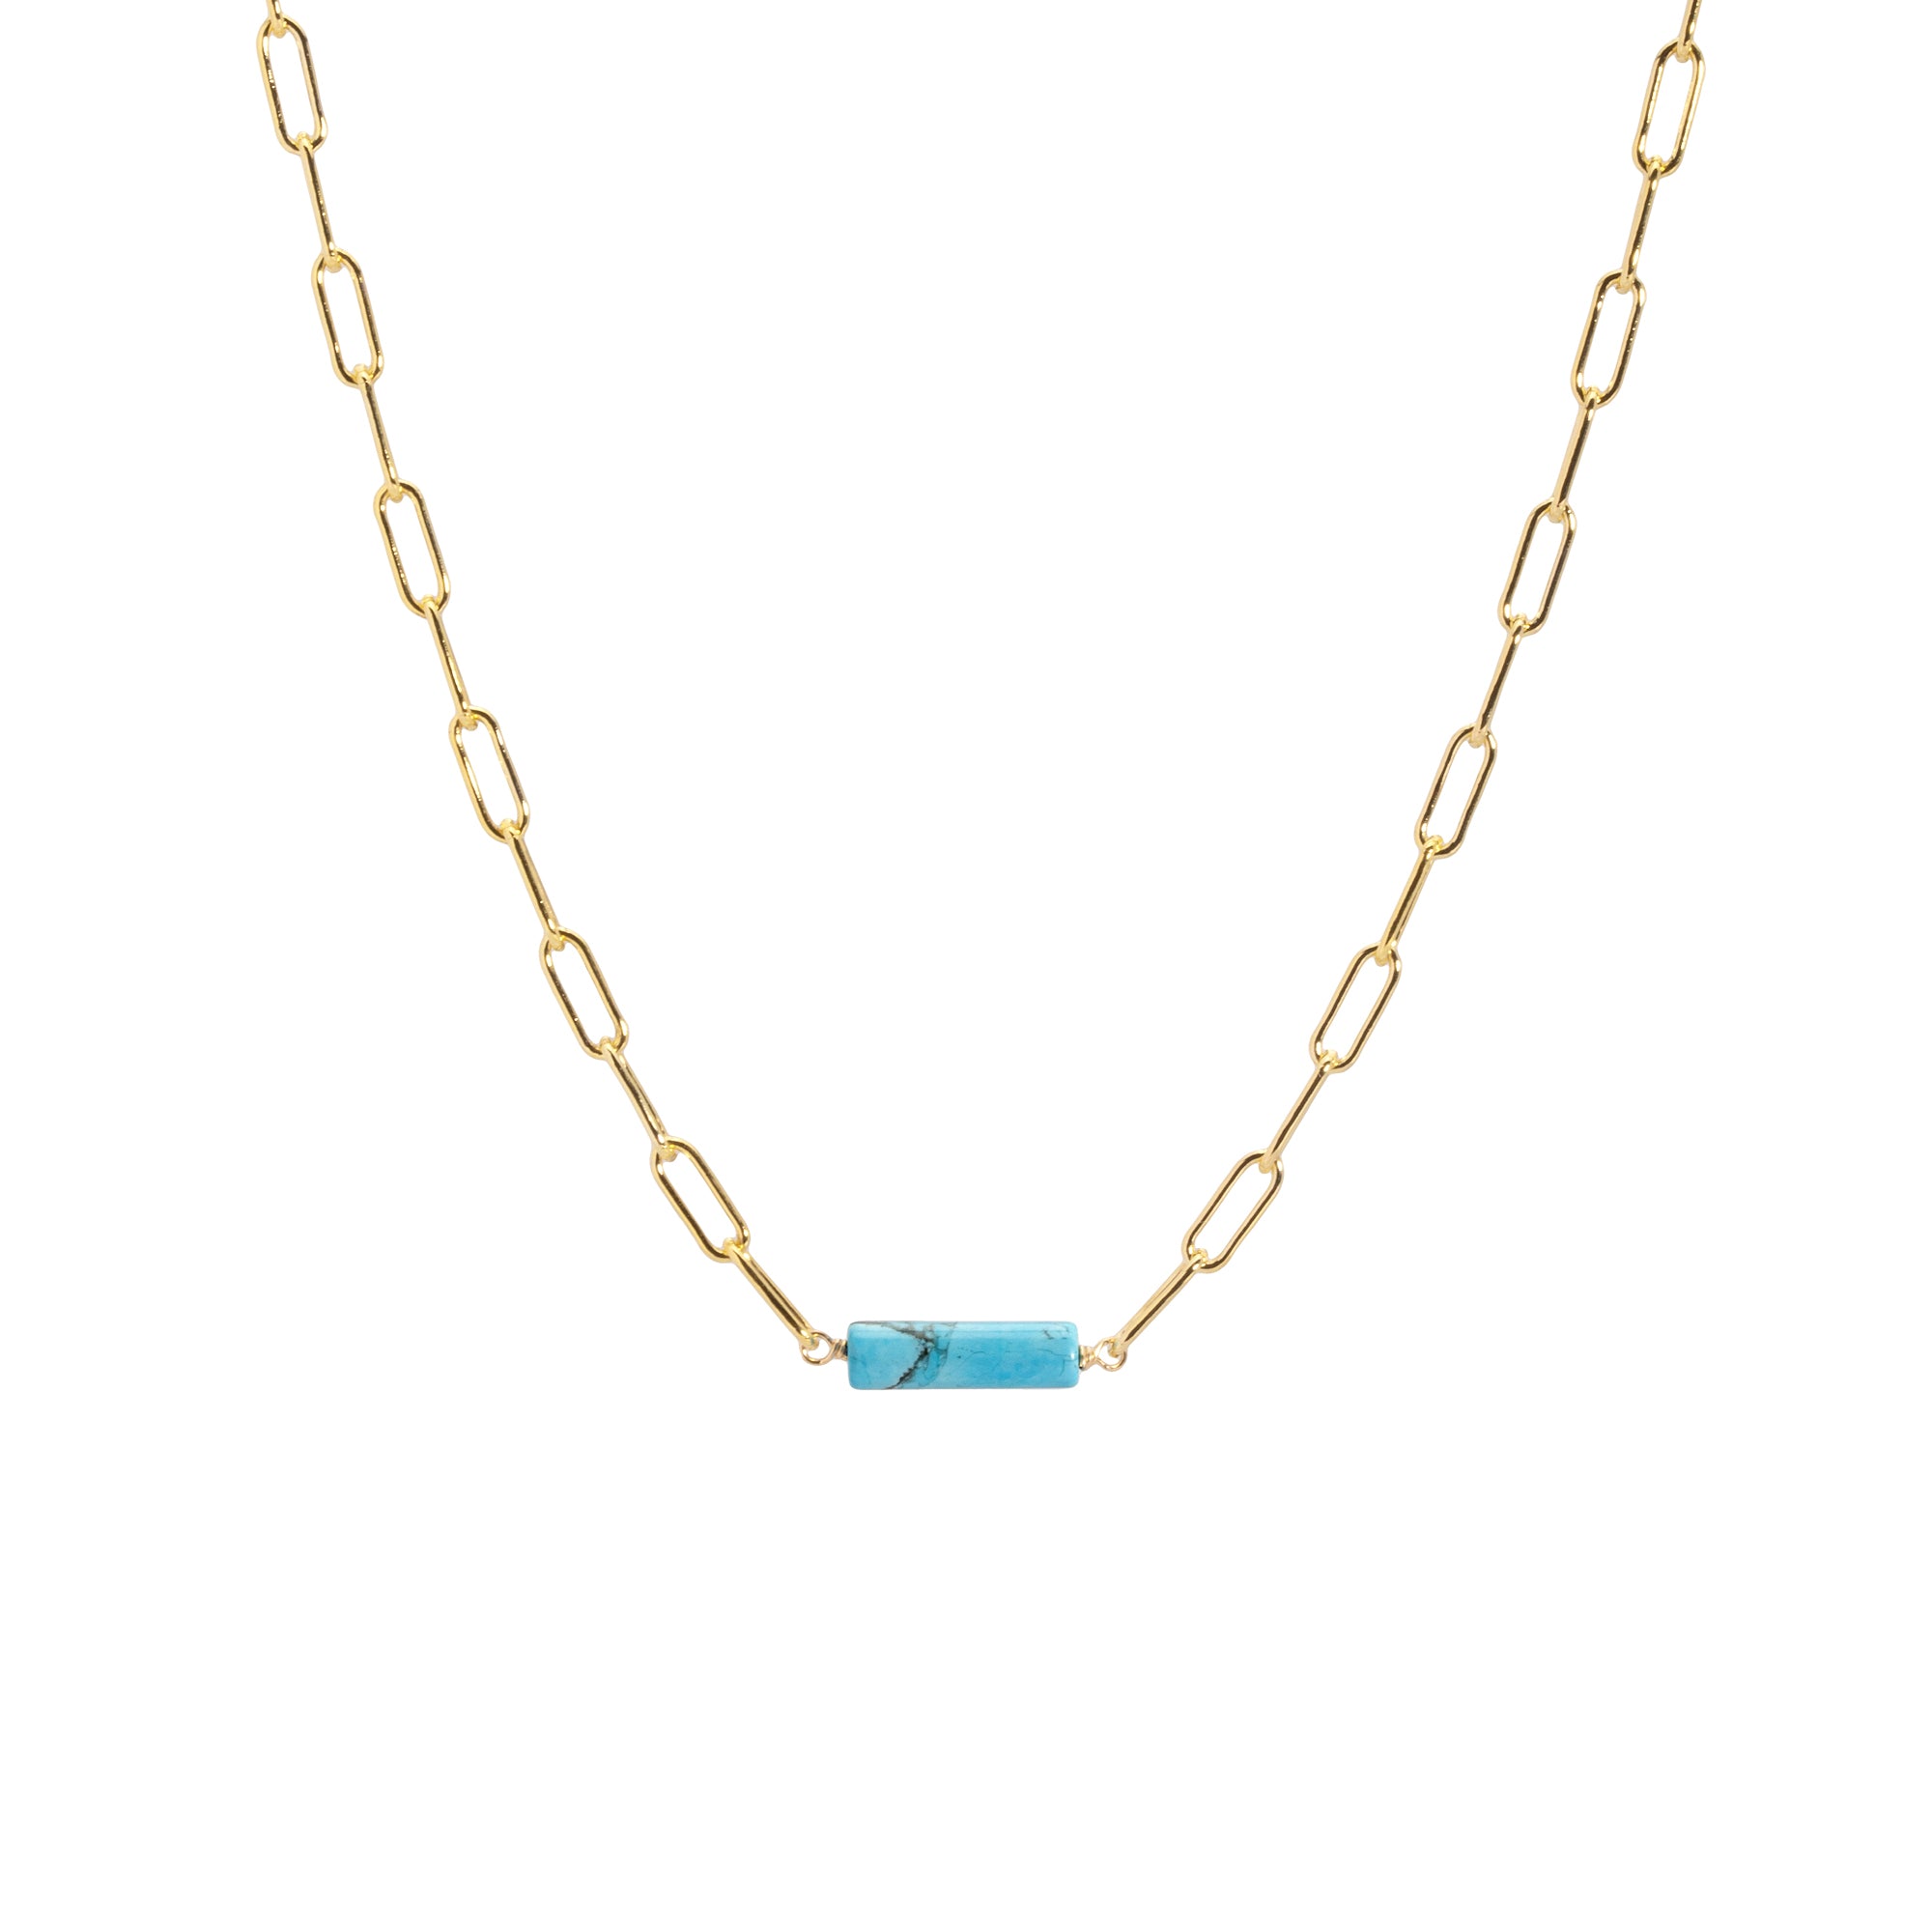 Paperclip chain necklace with turquoise barrel